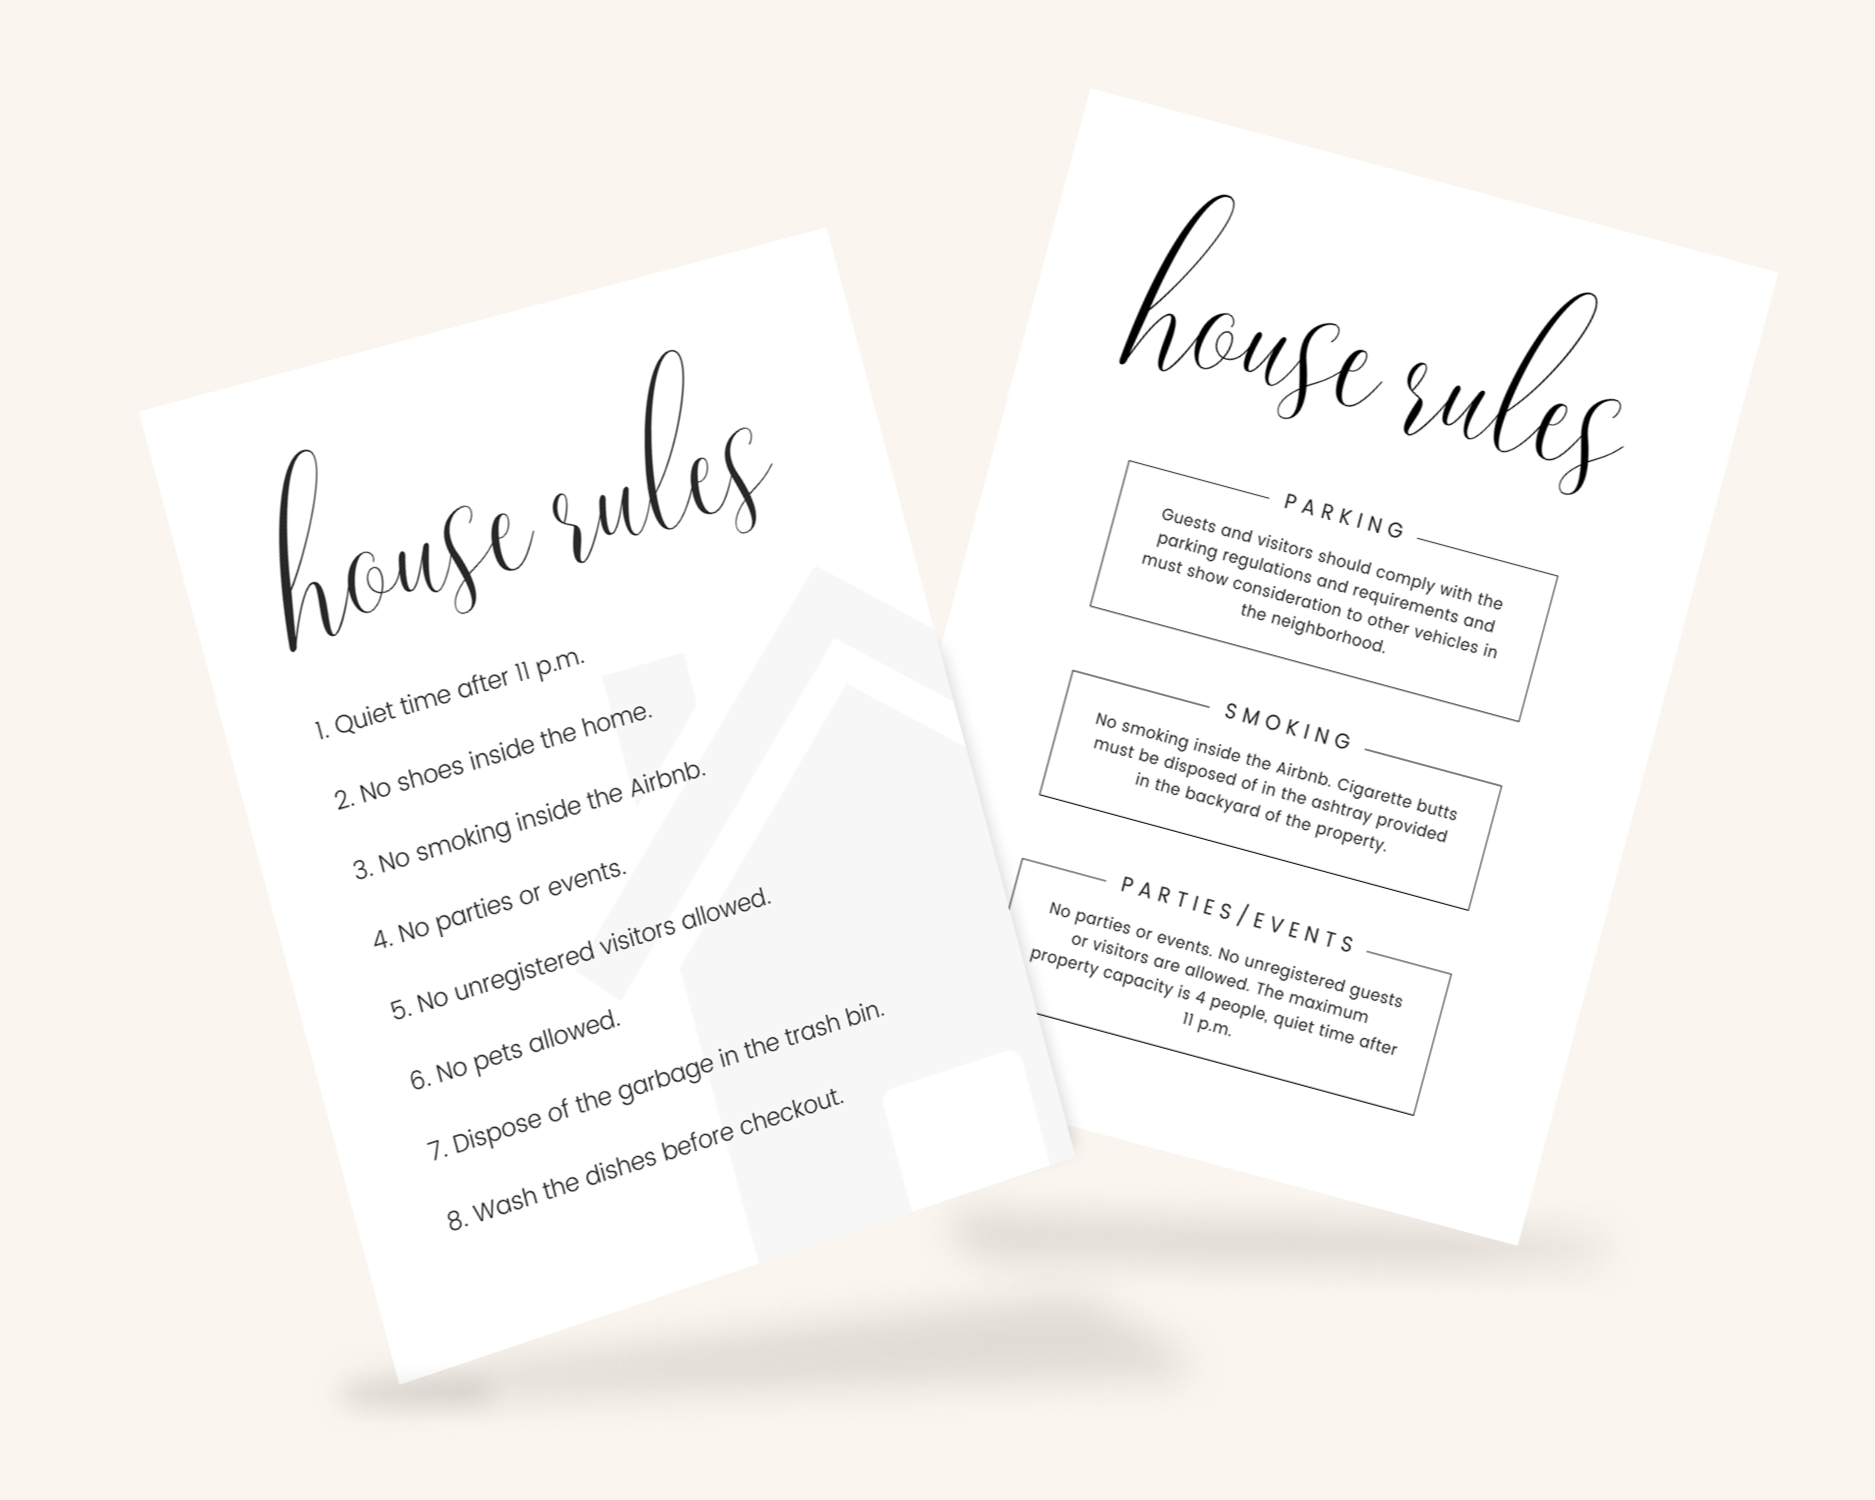 Real Estate Template – Airbnb House Rules Sign